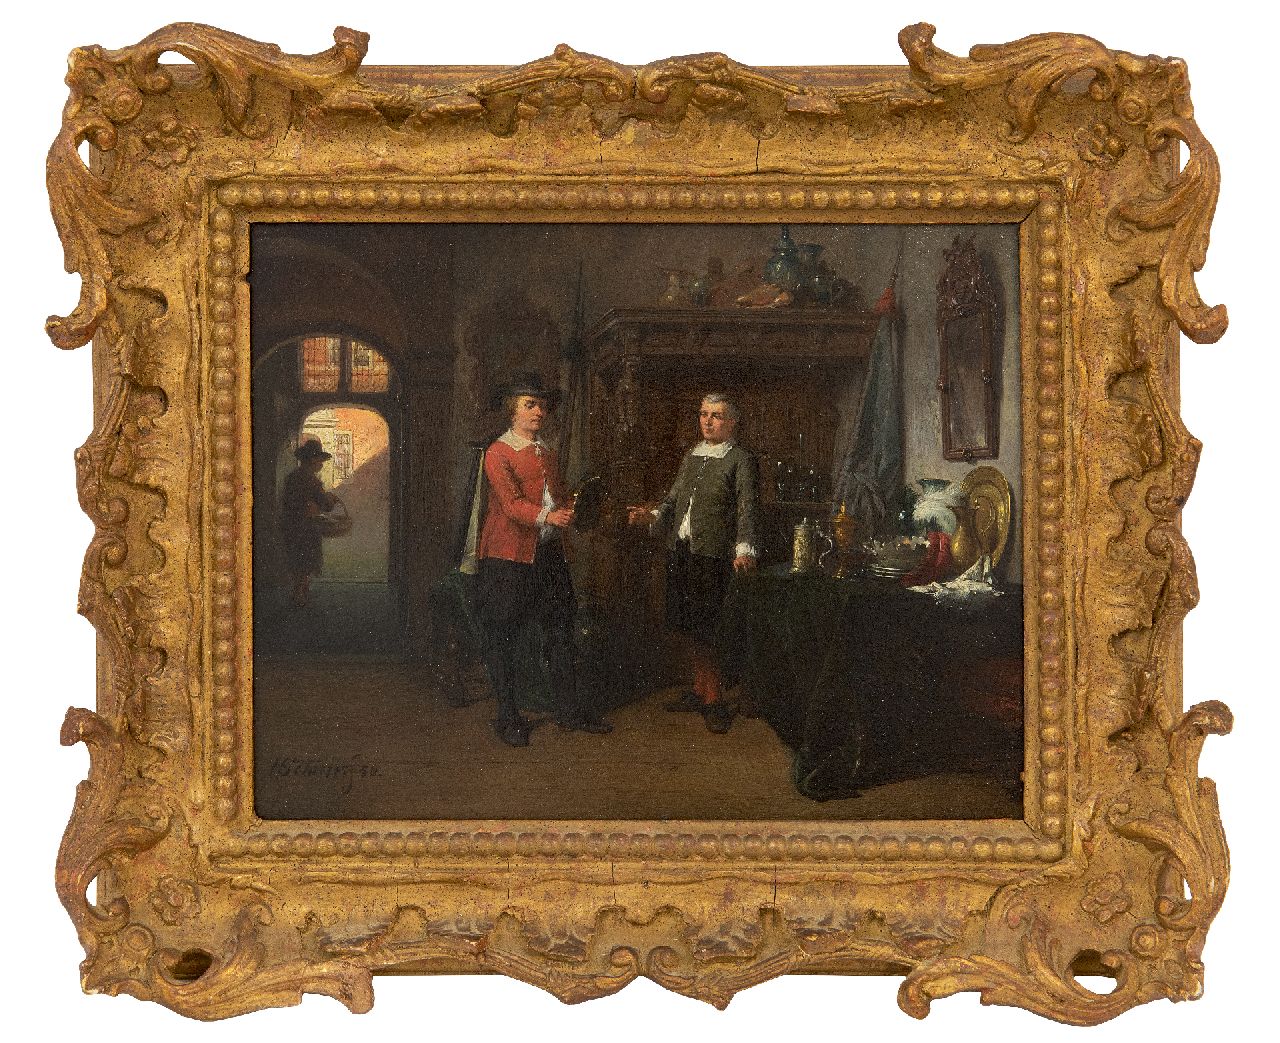 Scheeres H.J.  | Hendricus Johannes Scheeres | Paintings offered for sale | The connoisseurs, oil on panel 17.6 x 23.6 cm, signed l.l. and dated '58